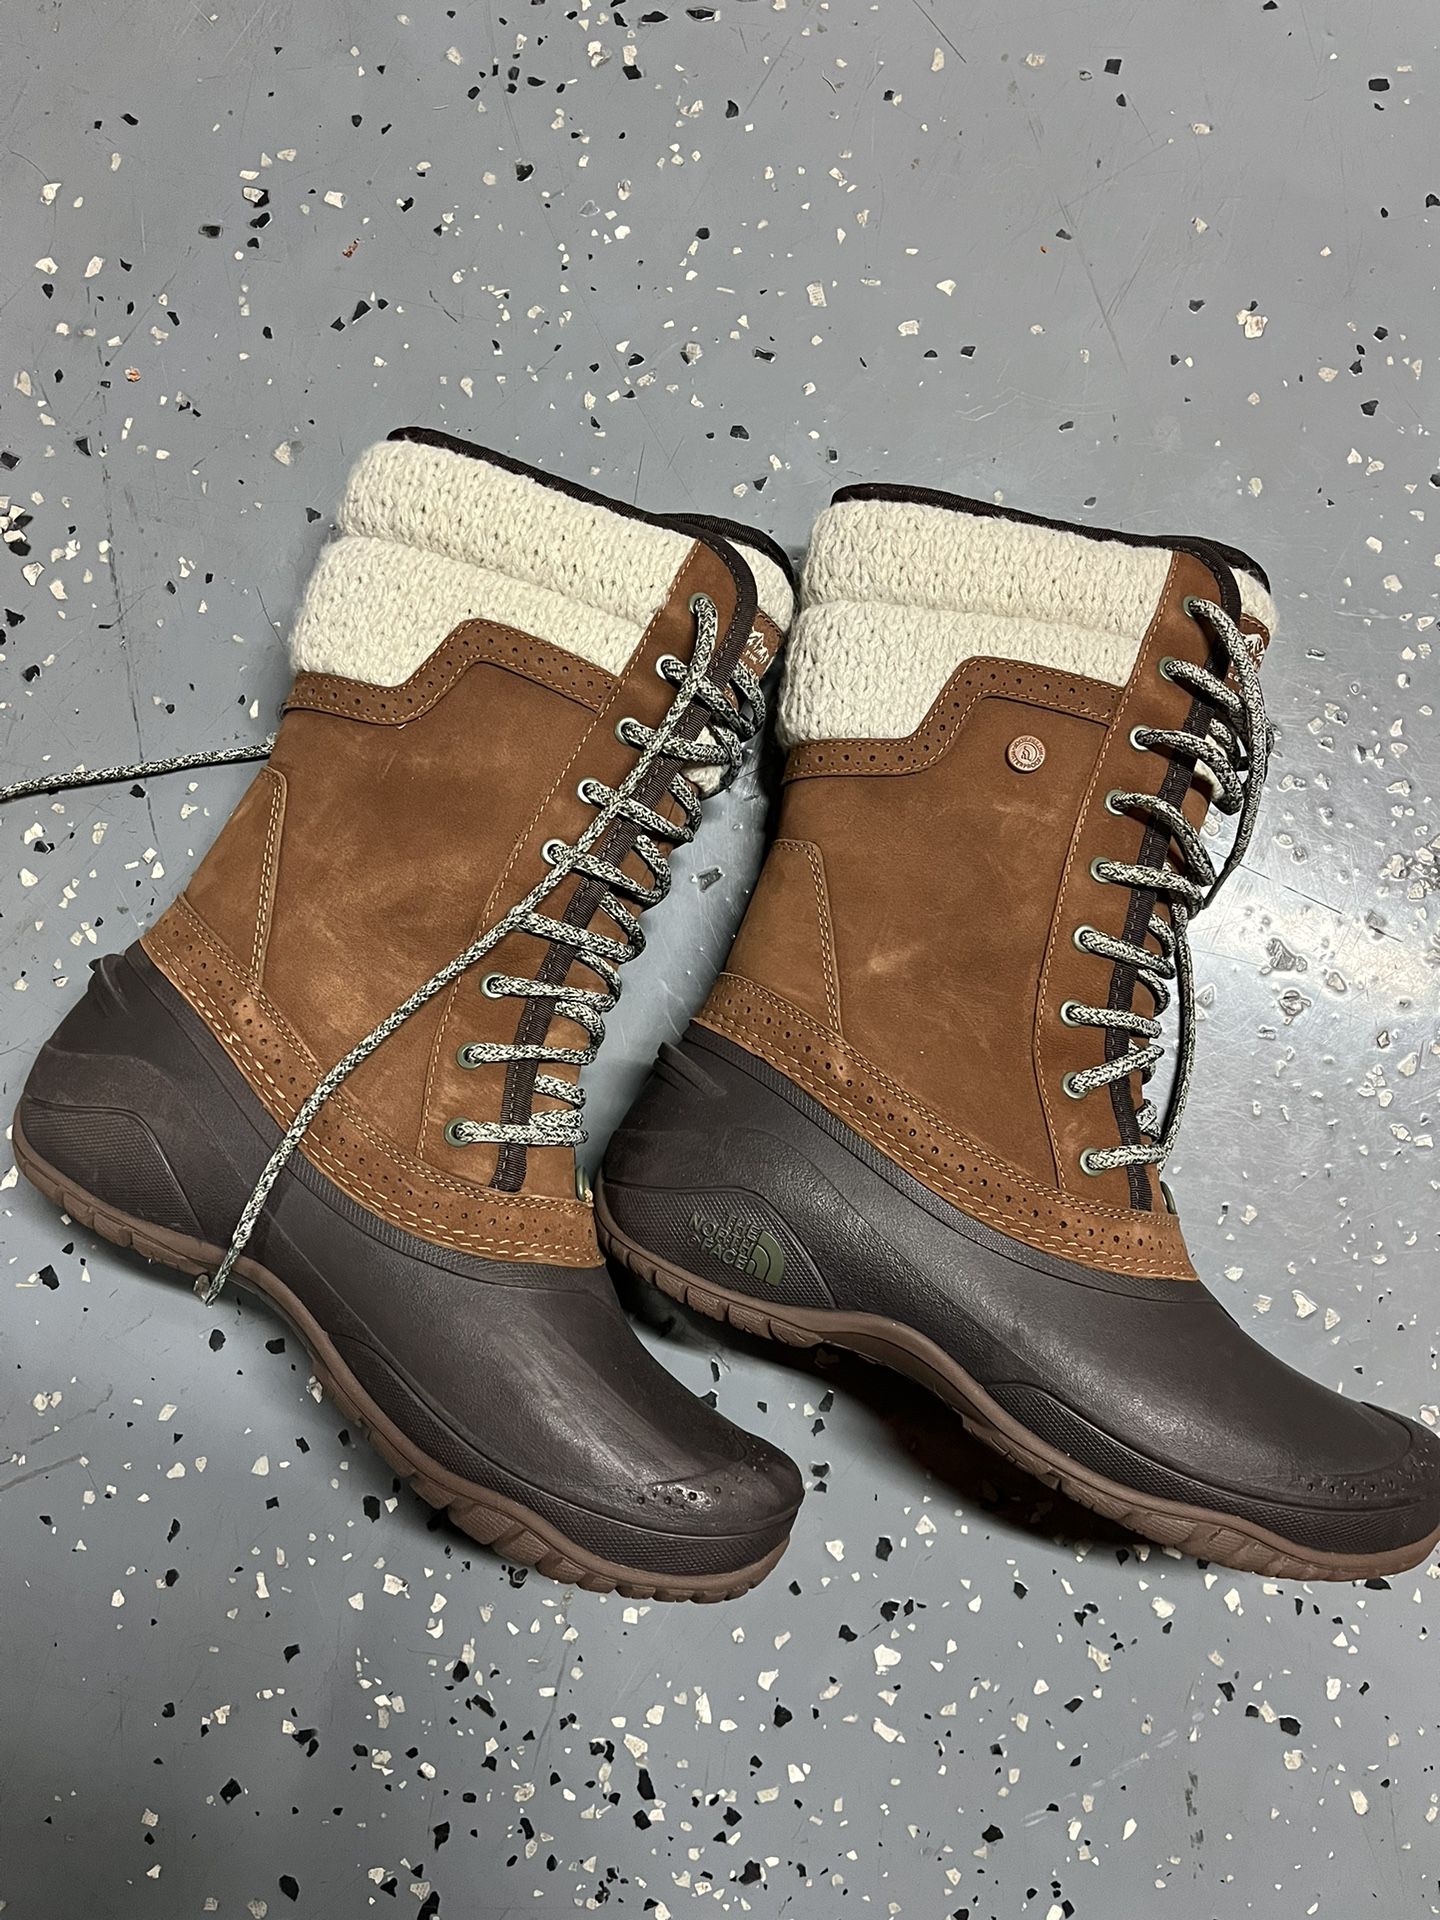 Women’s North Face Boots 